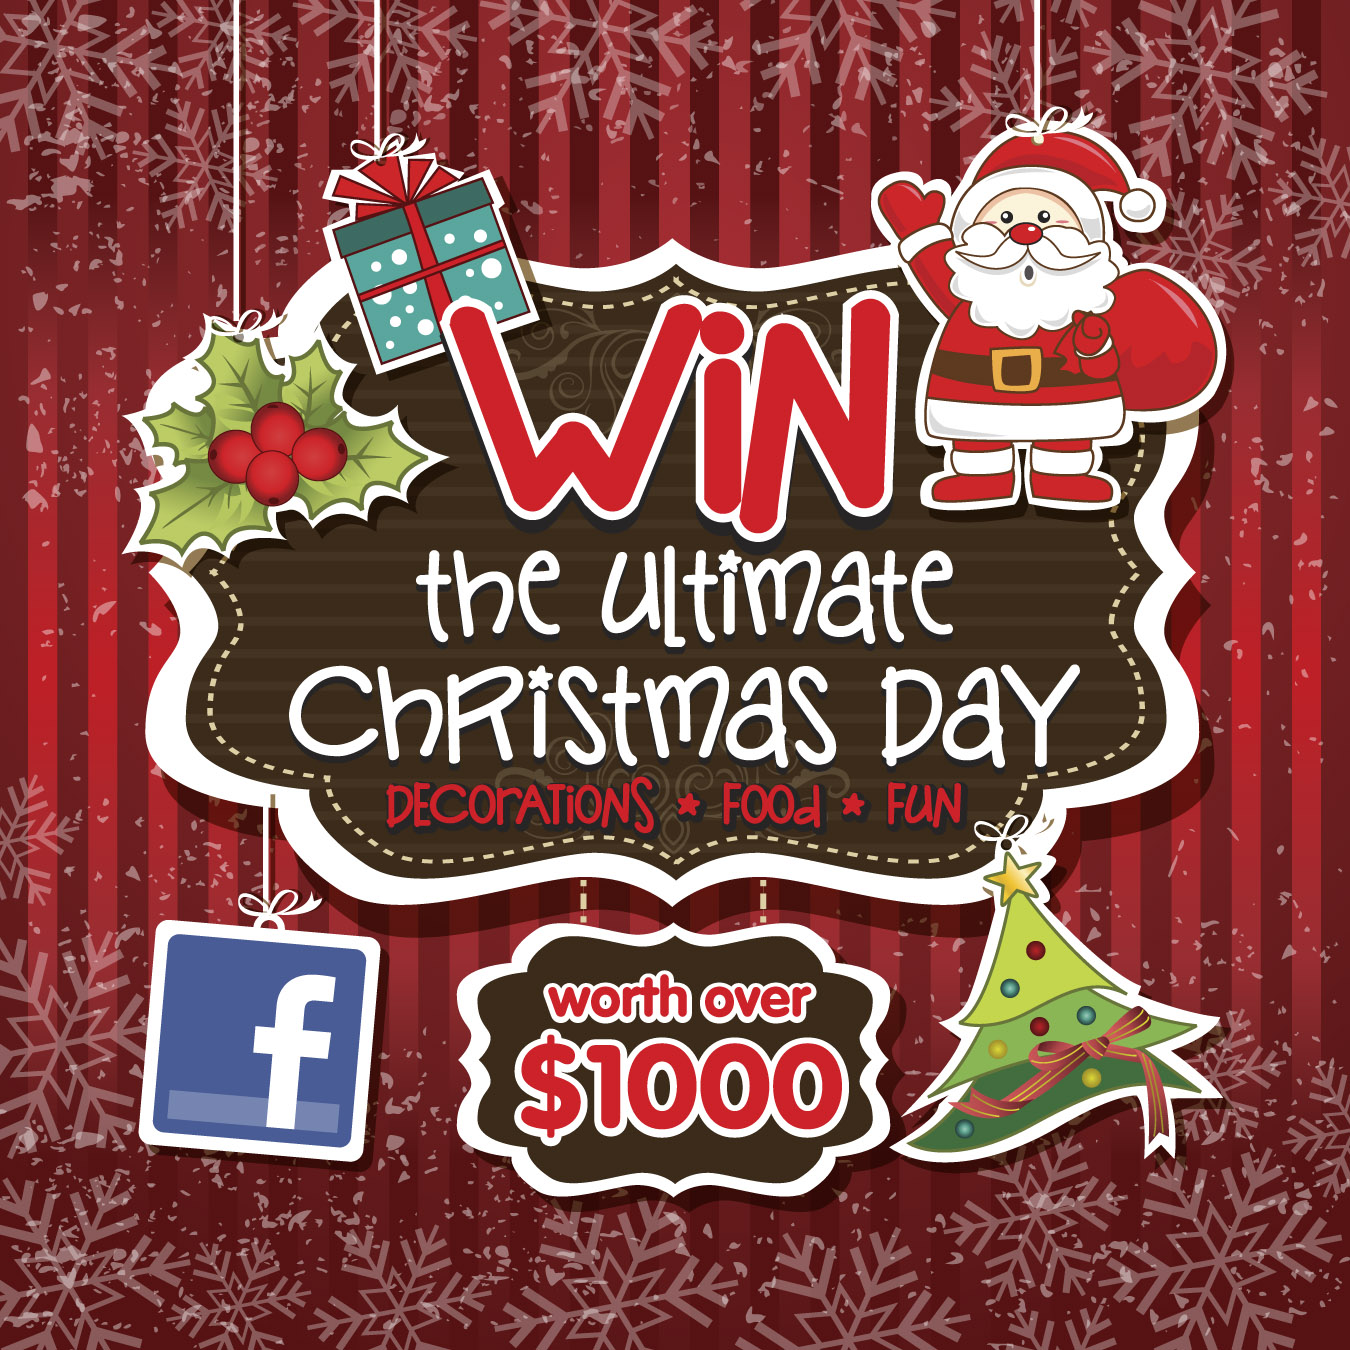 WIN THe Ultimate Christmas Day worth over $1000